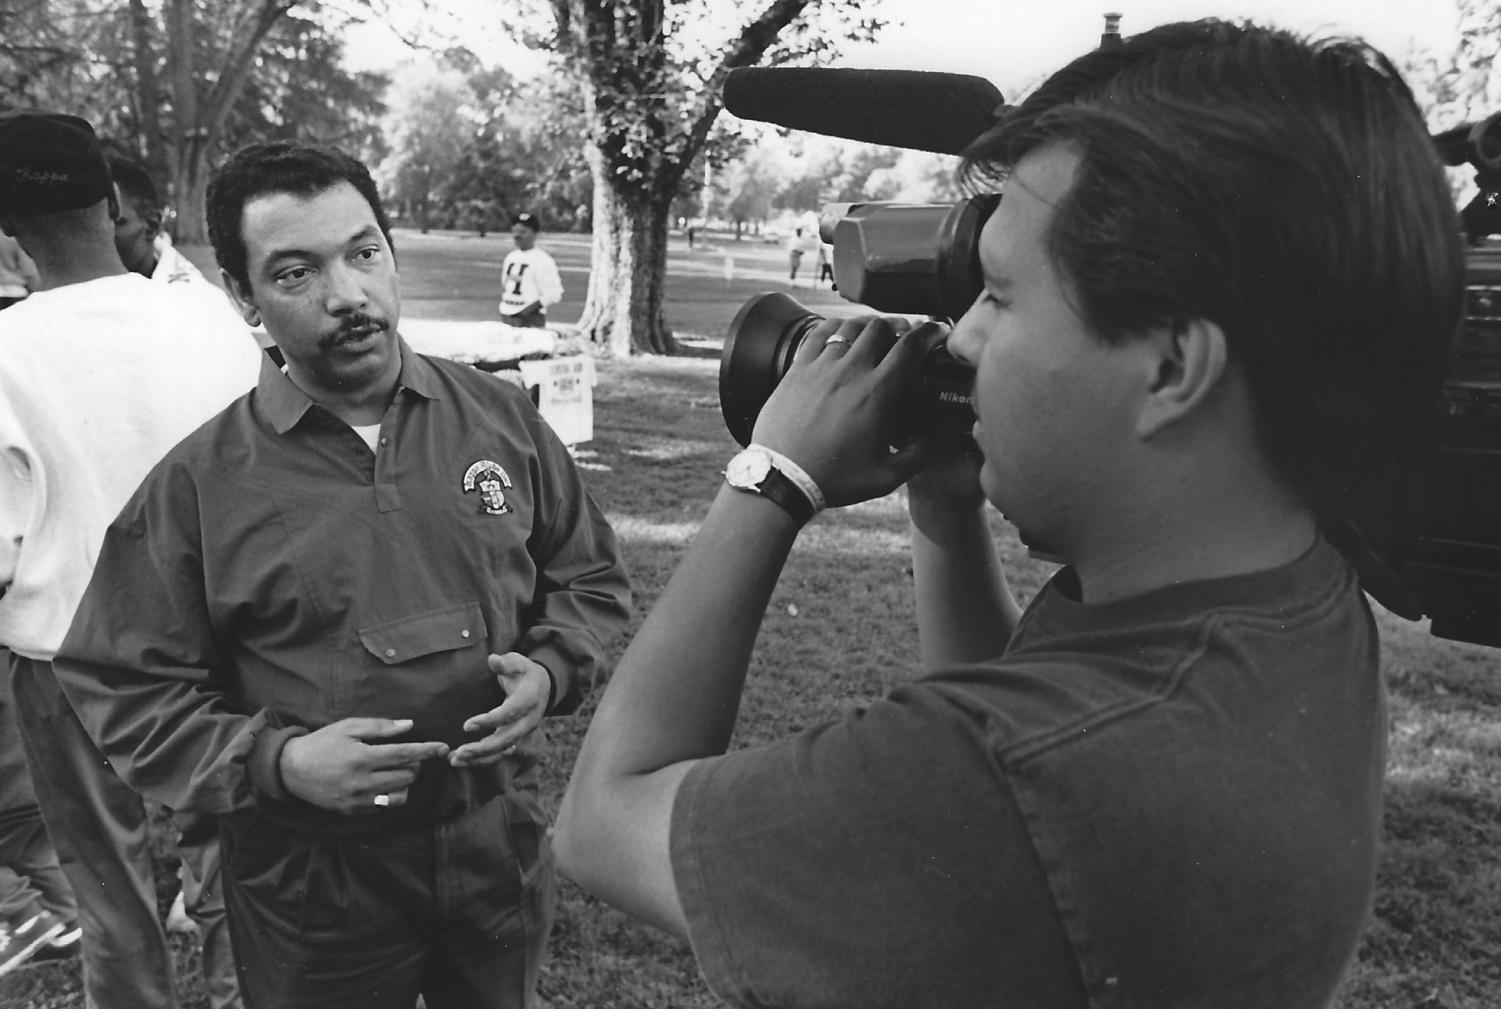 James Reede at the UNCF walk-a-thon in 1994. This walk-a-thon raised money for Black students attending college, according to the UNCF’s website. Photo courtesy of James Reede.